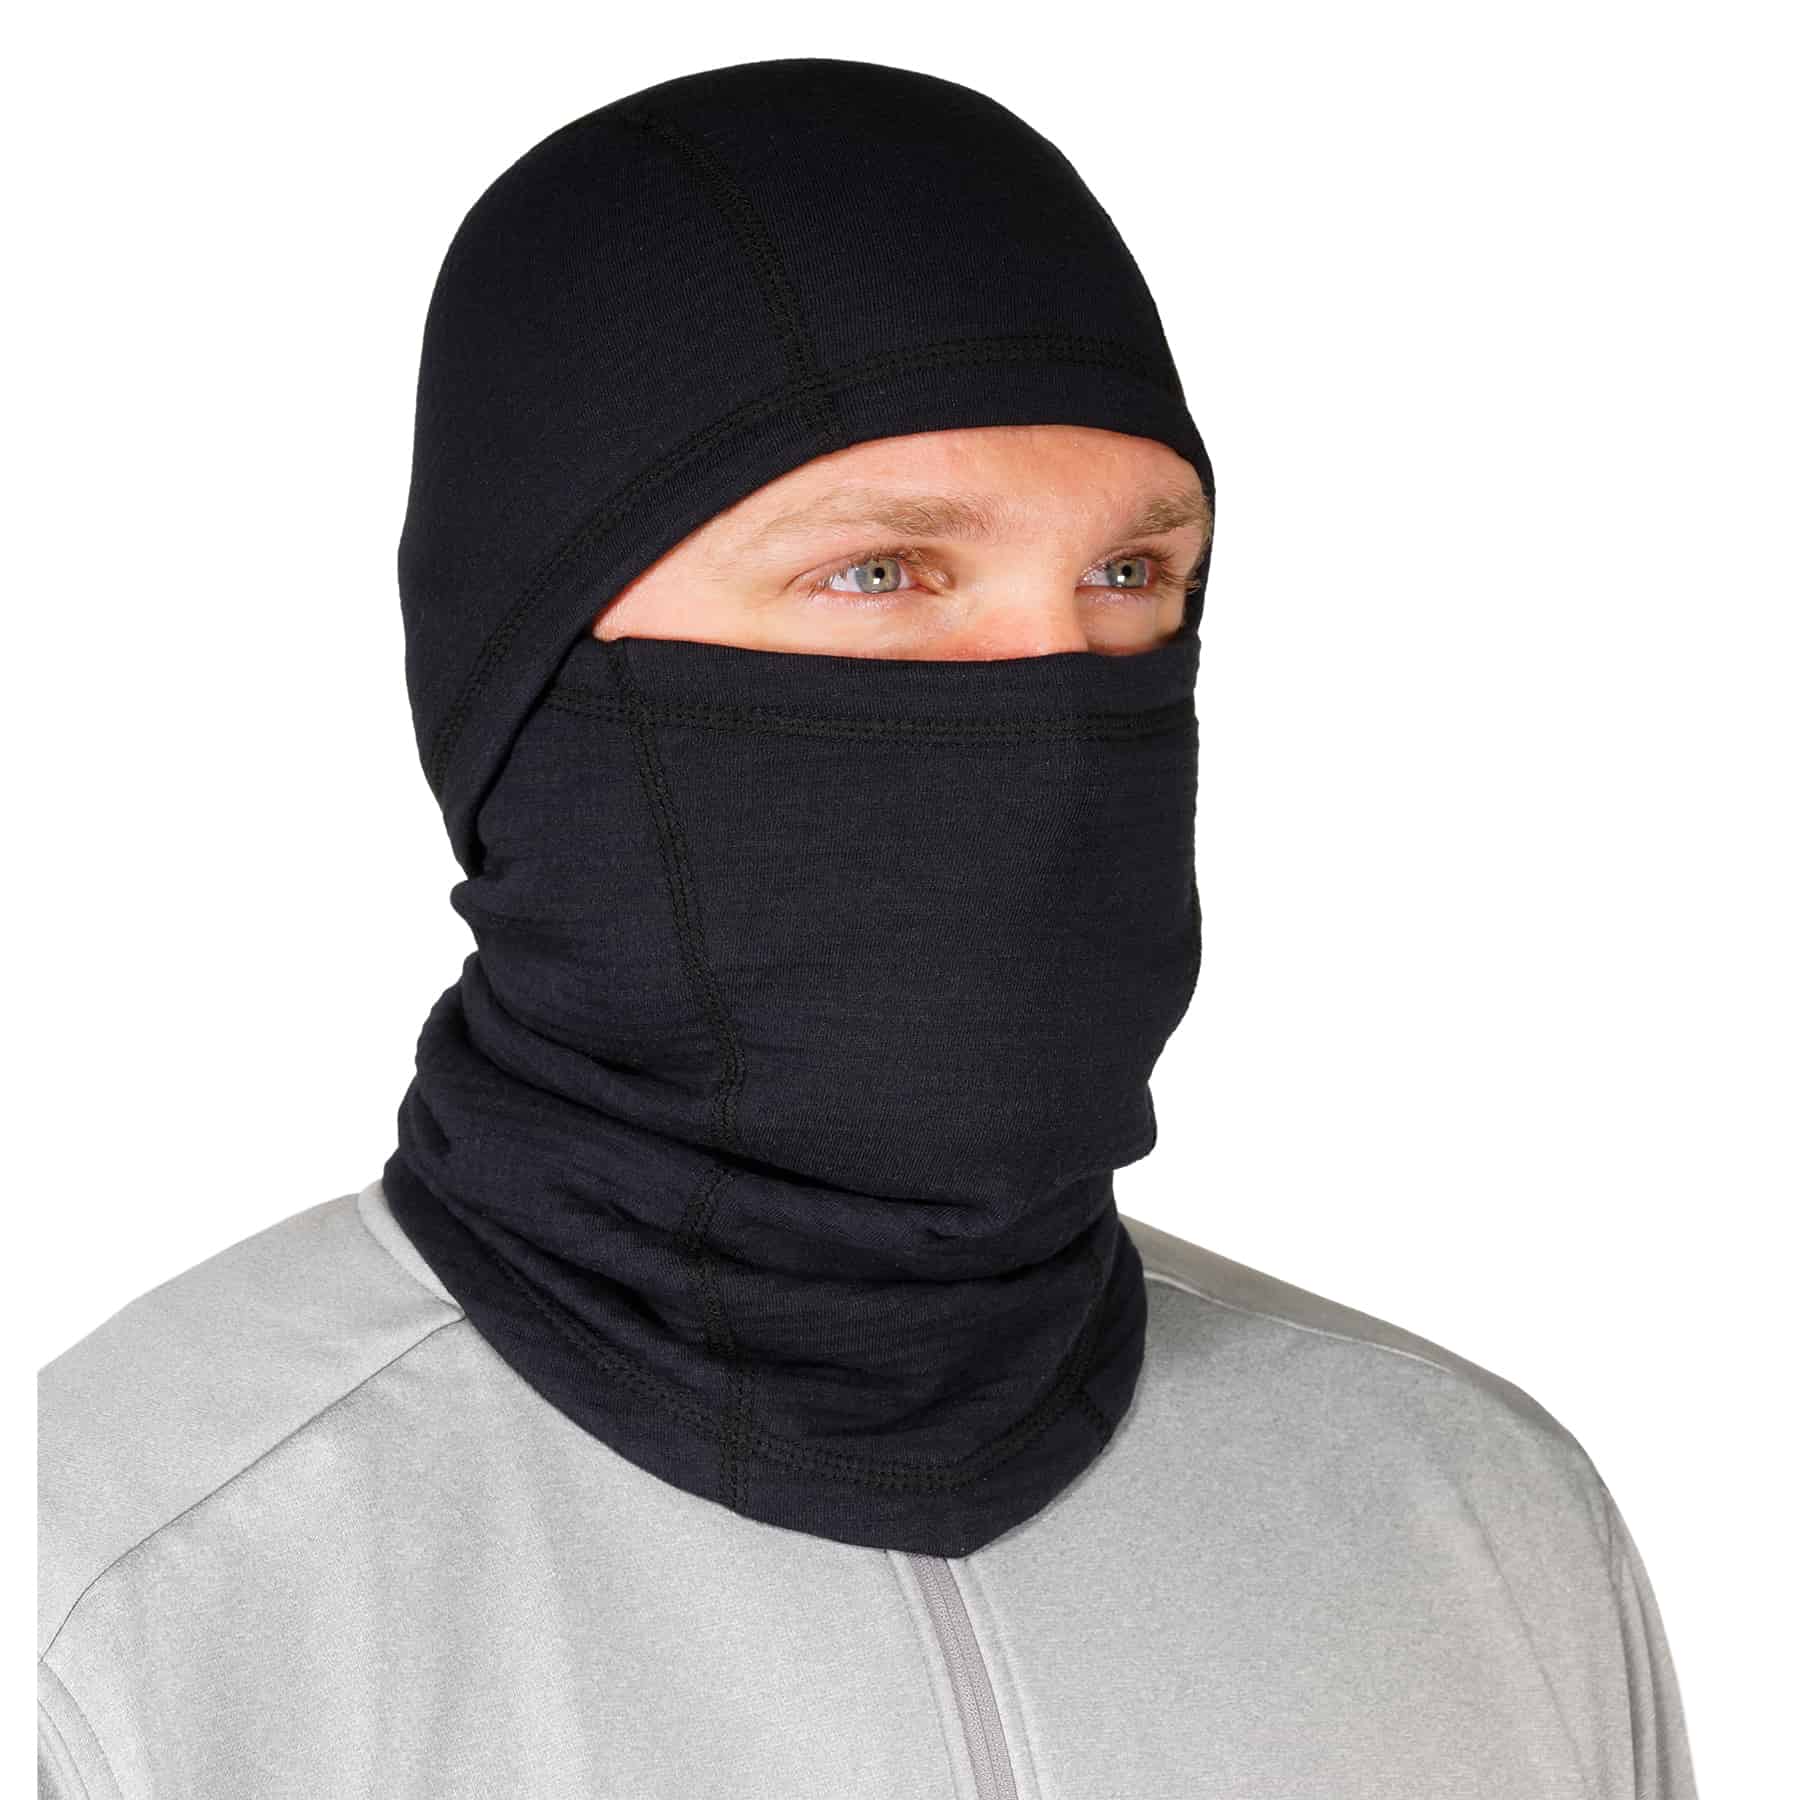 Fullsheild 2Pack 100% Flame Resistant Cotton FR Balaclava 12 Cal Arc Rated Face Mask Hood for Men Women One Size Black